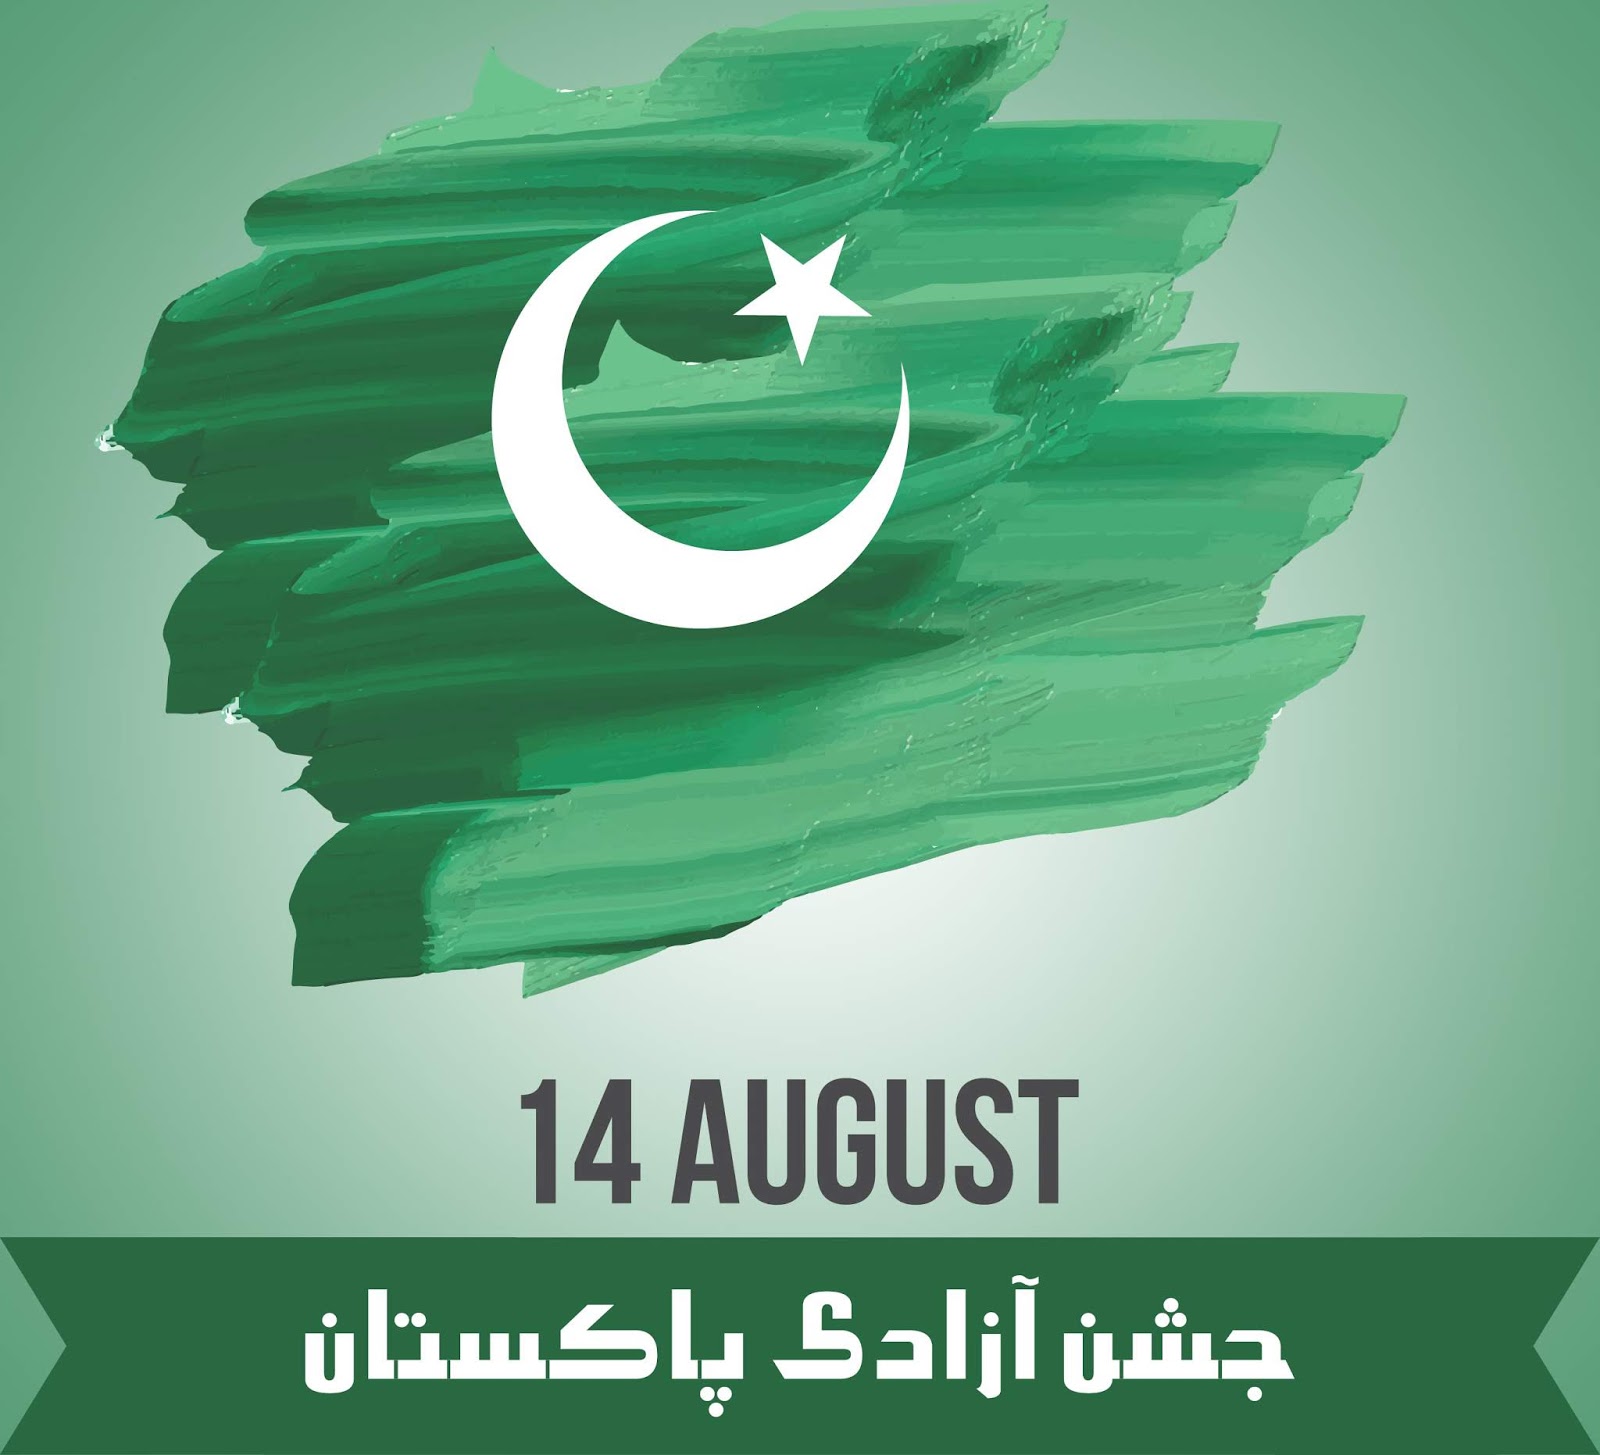 HD Wallpaper Pics, 14 august happy independence day Pakistan Wishes Image New 2020 Free Download